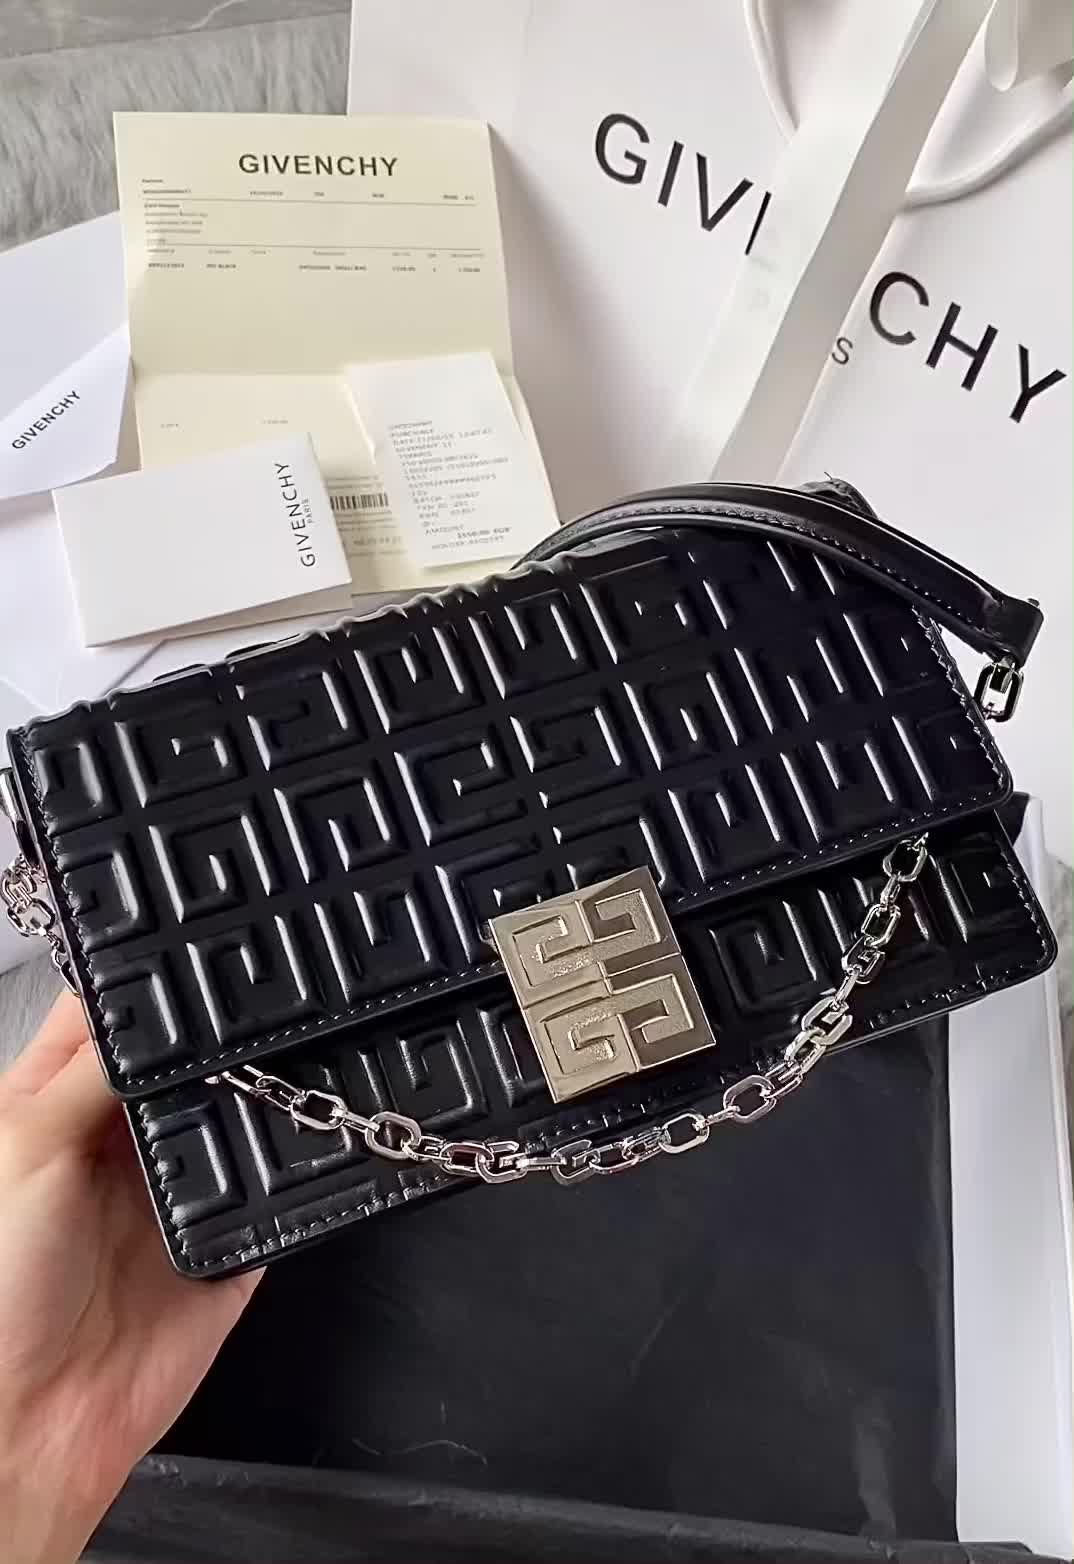 Givenchy-Bag-Mirror Quality Code: ZB1961 $: 219USD